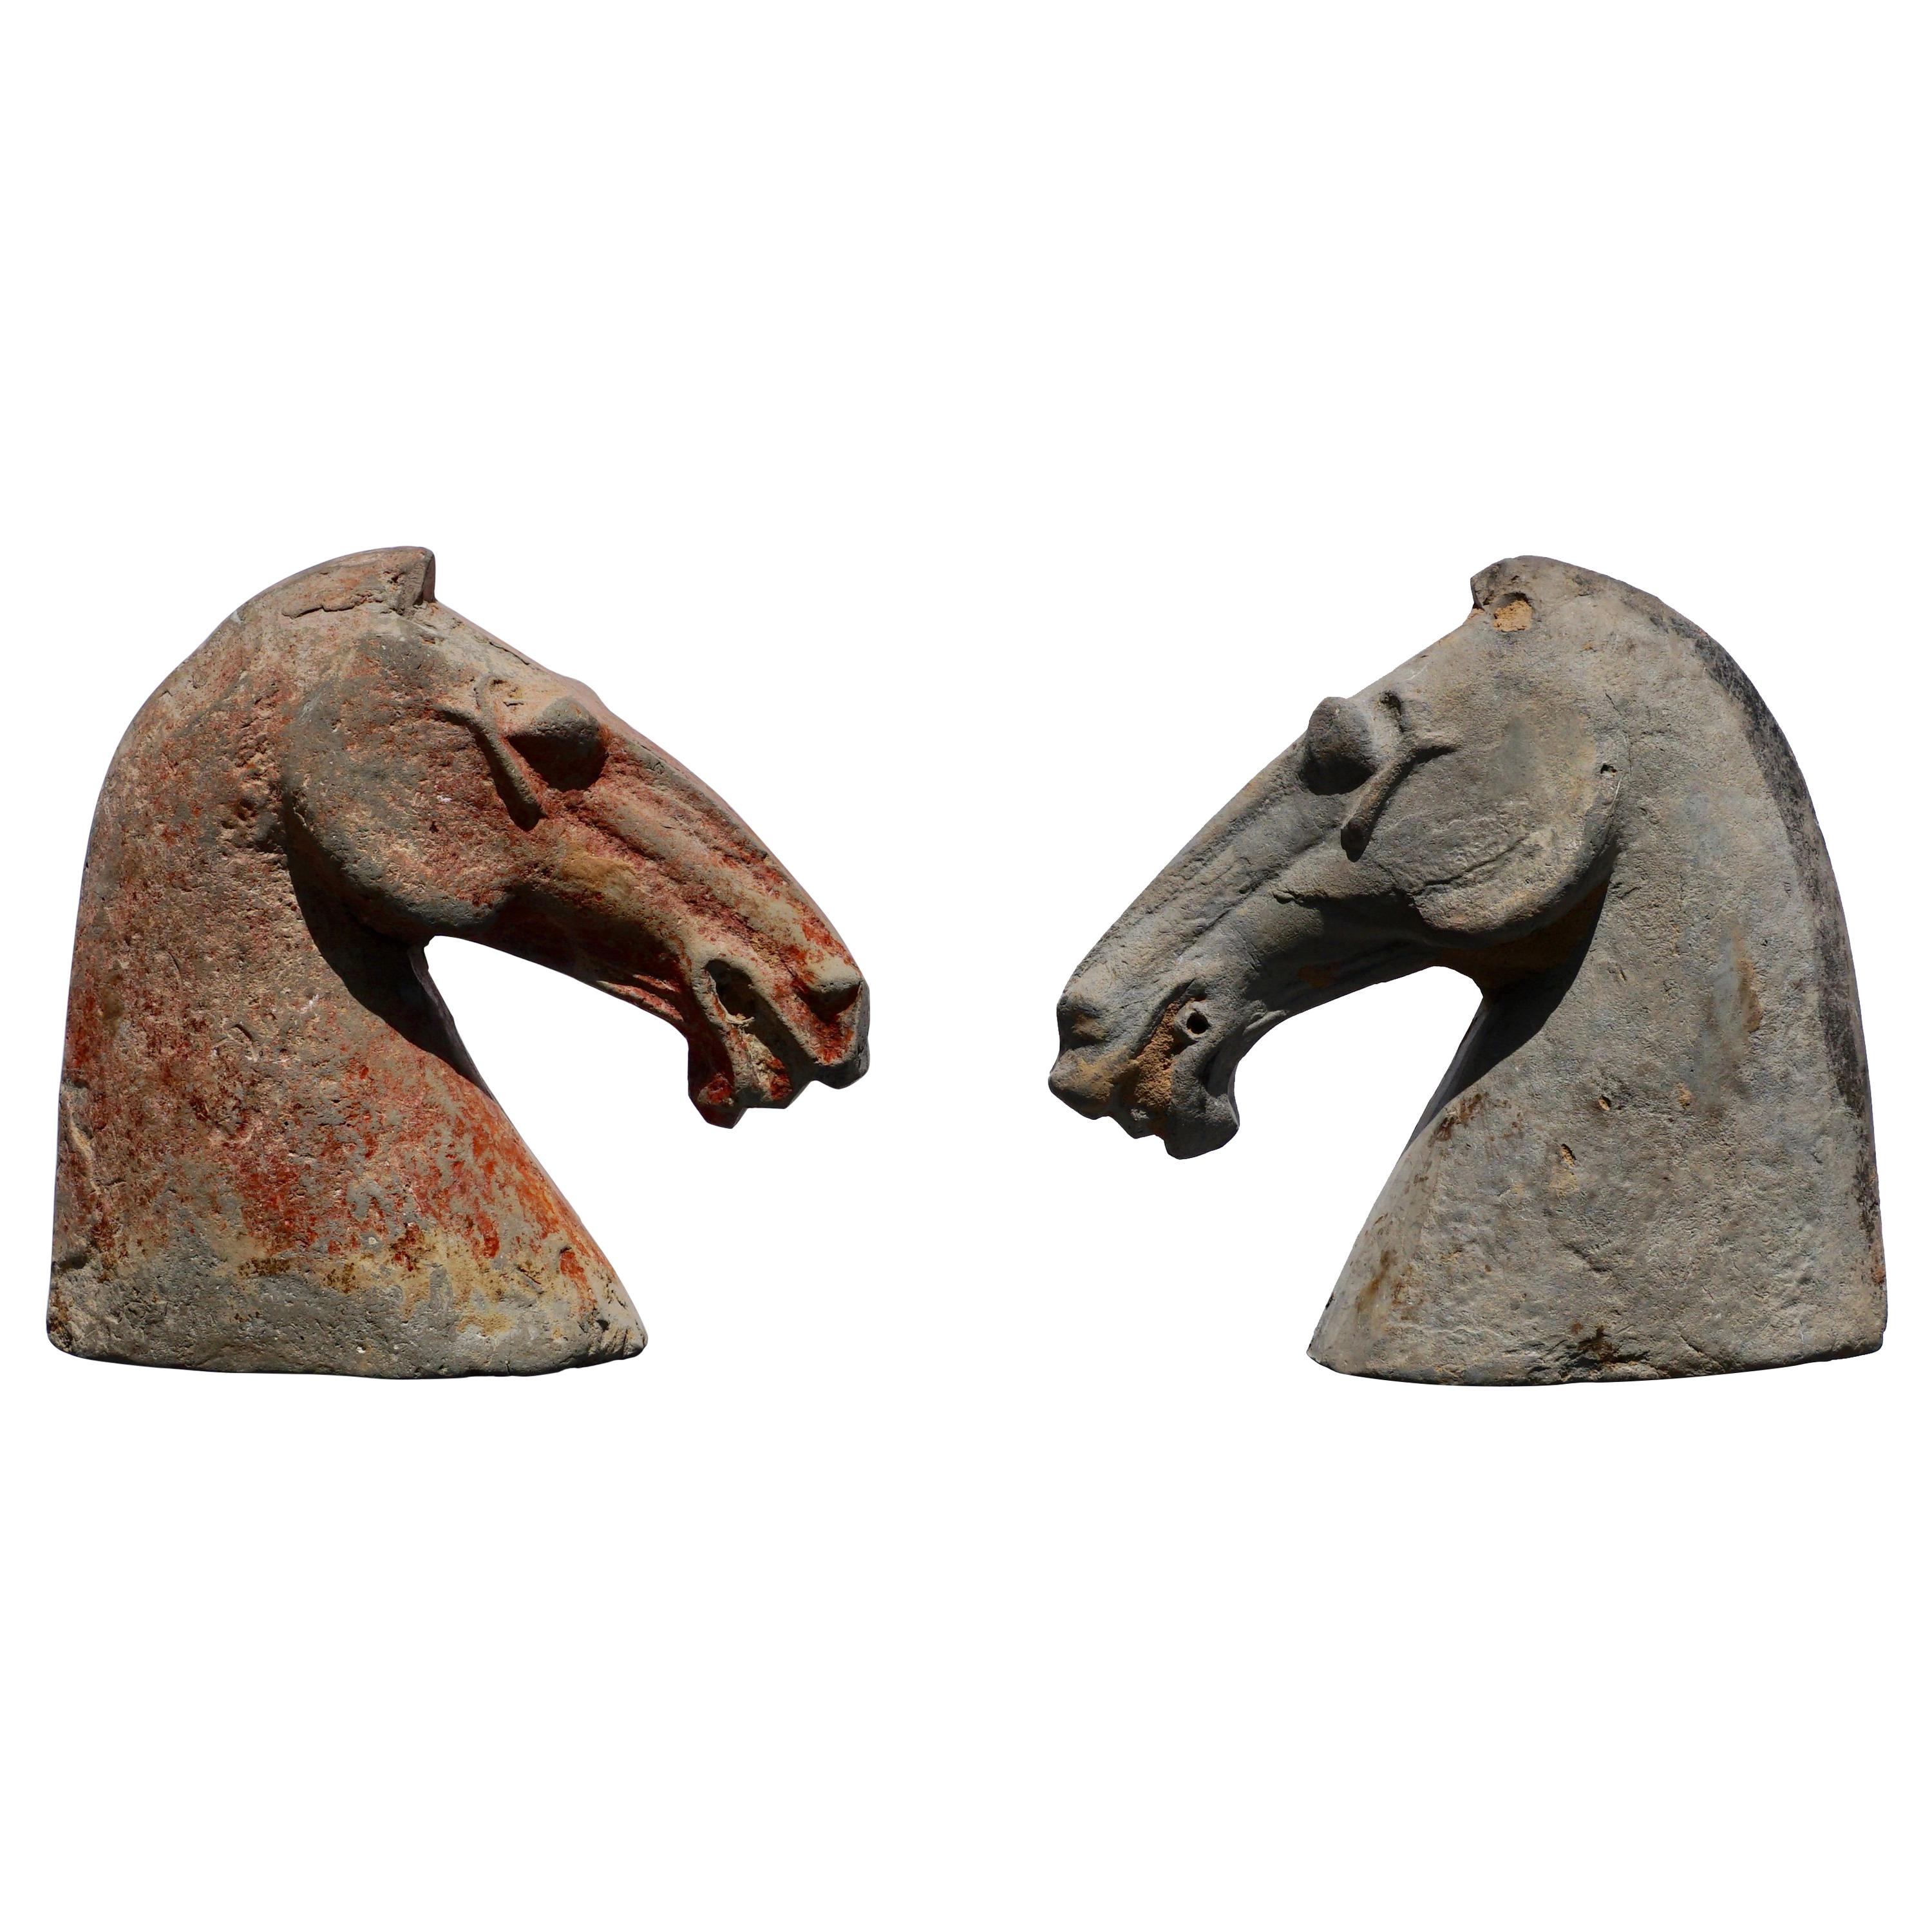 Pair of Han Dynasty Horse Heads (206BC - 220AD) Attributed